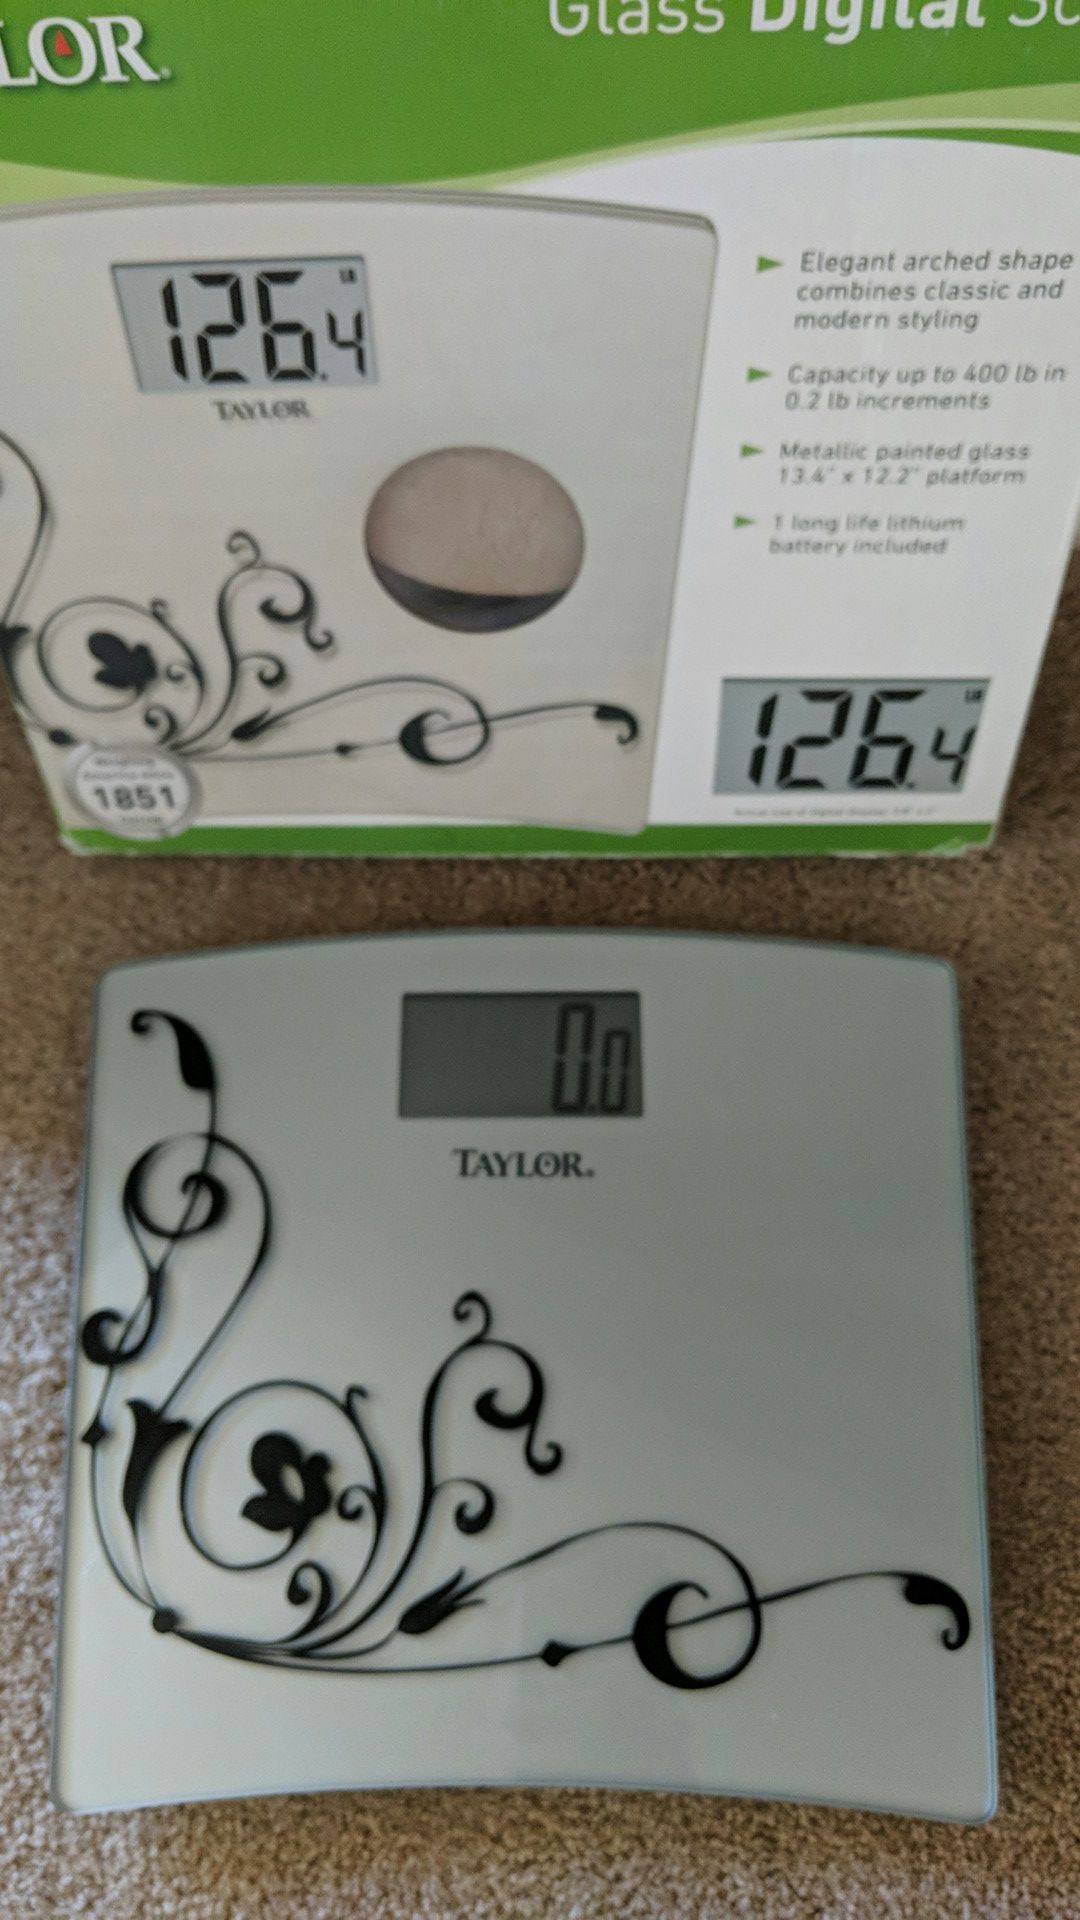 Taylor Bathroom Scale in New Condition, works perfectly.